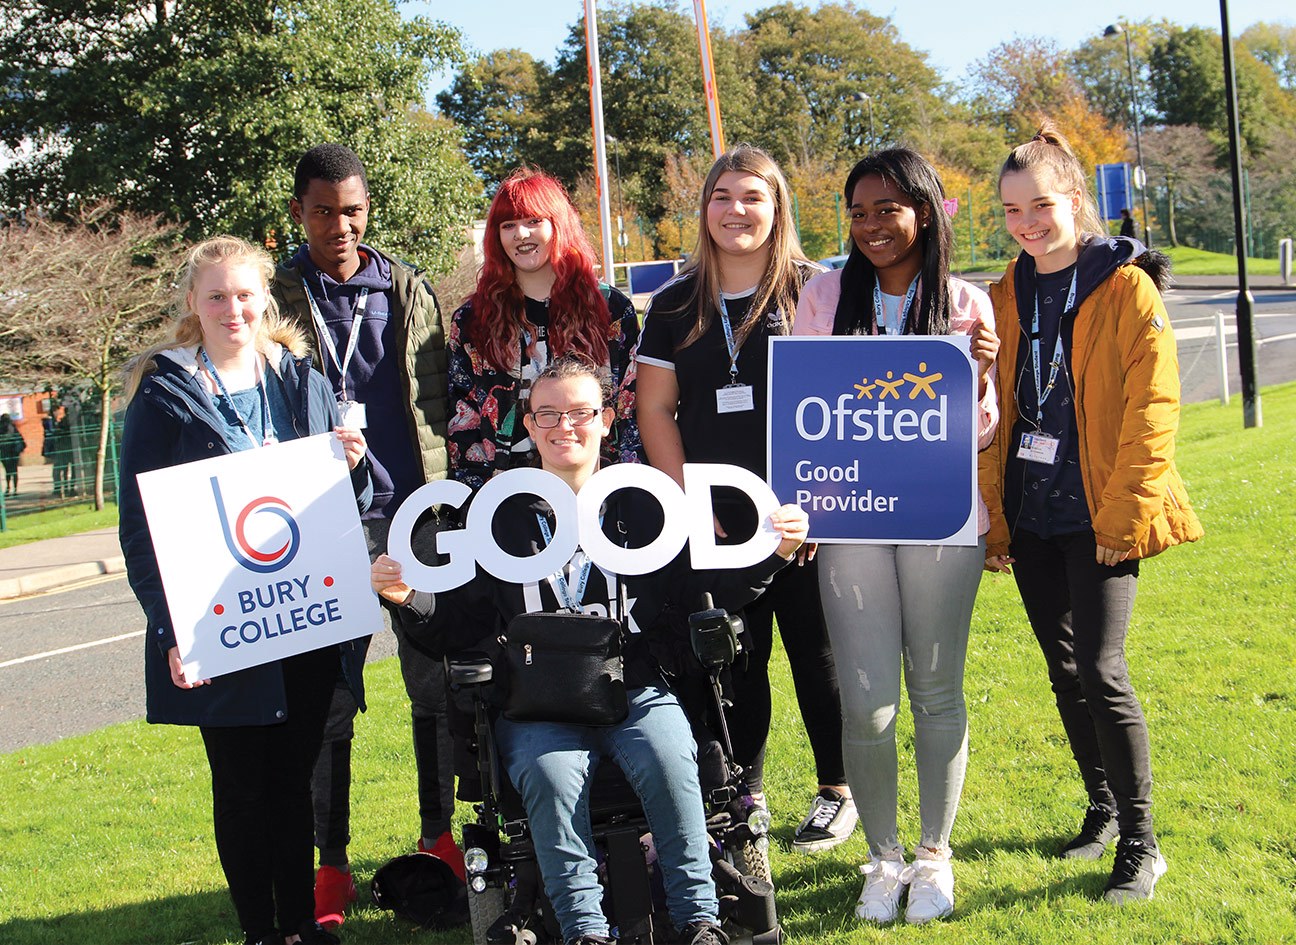 Ofsted Good - Students holding a sign spelling the word "good"